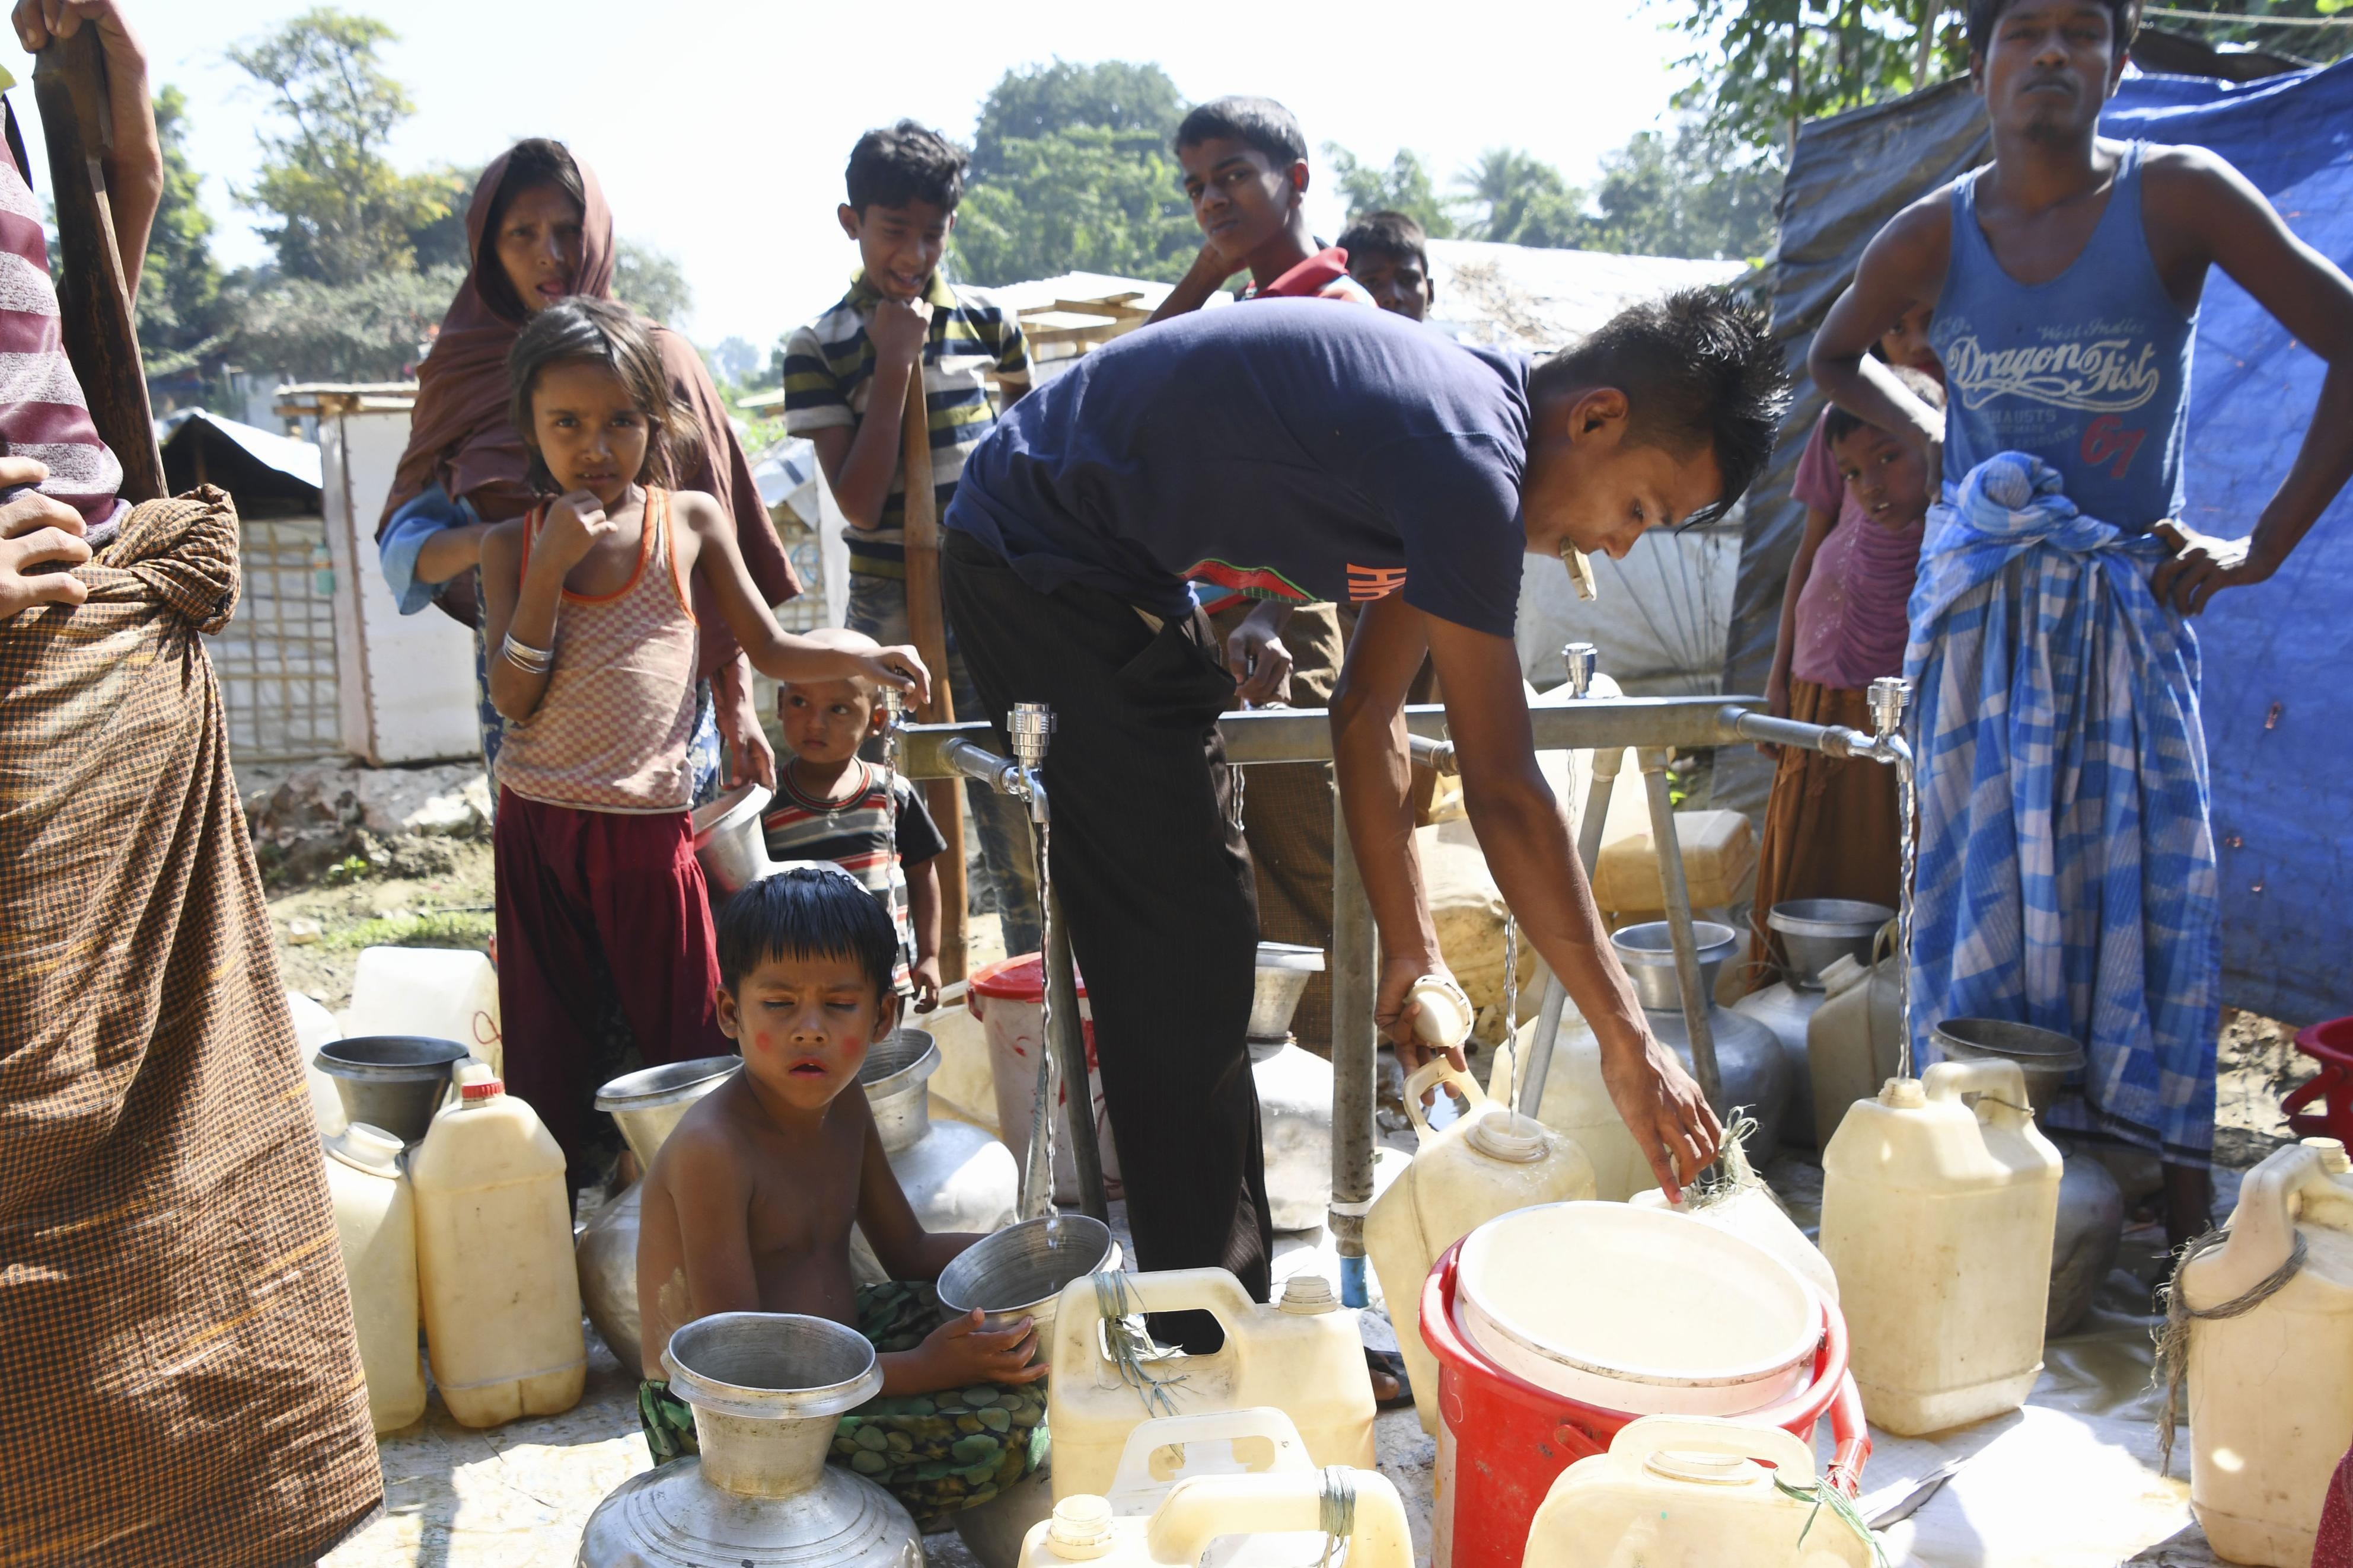 Rohingya Muslims fill water containers at a refugee camp in Cox's Bazar. Photo: Kyodo